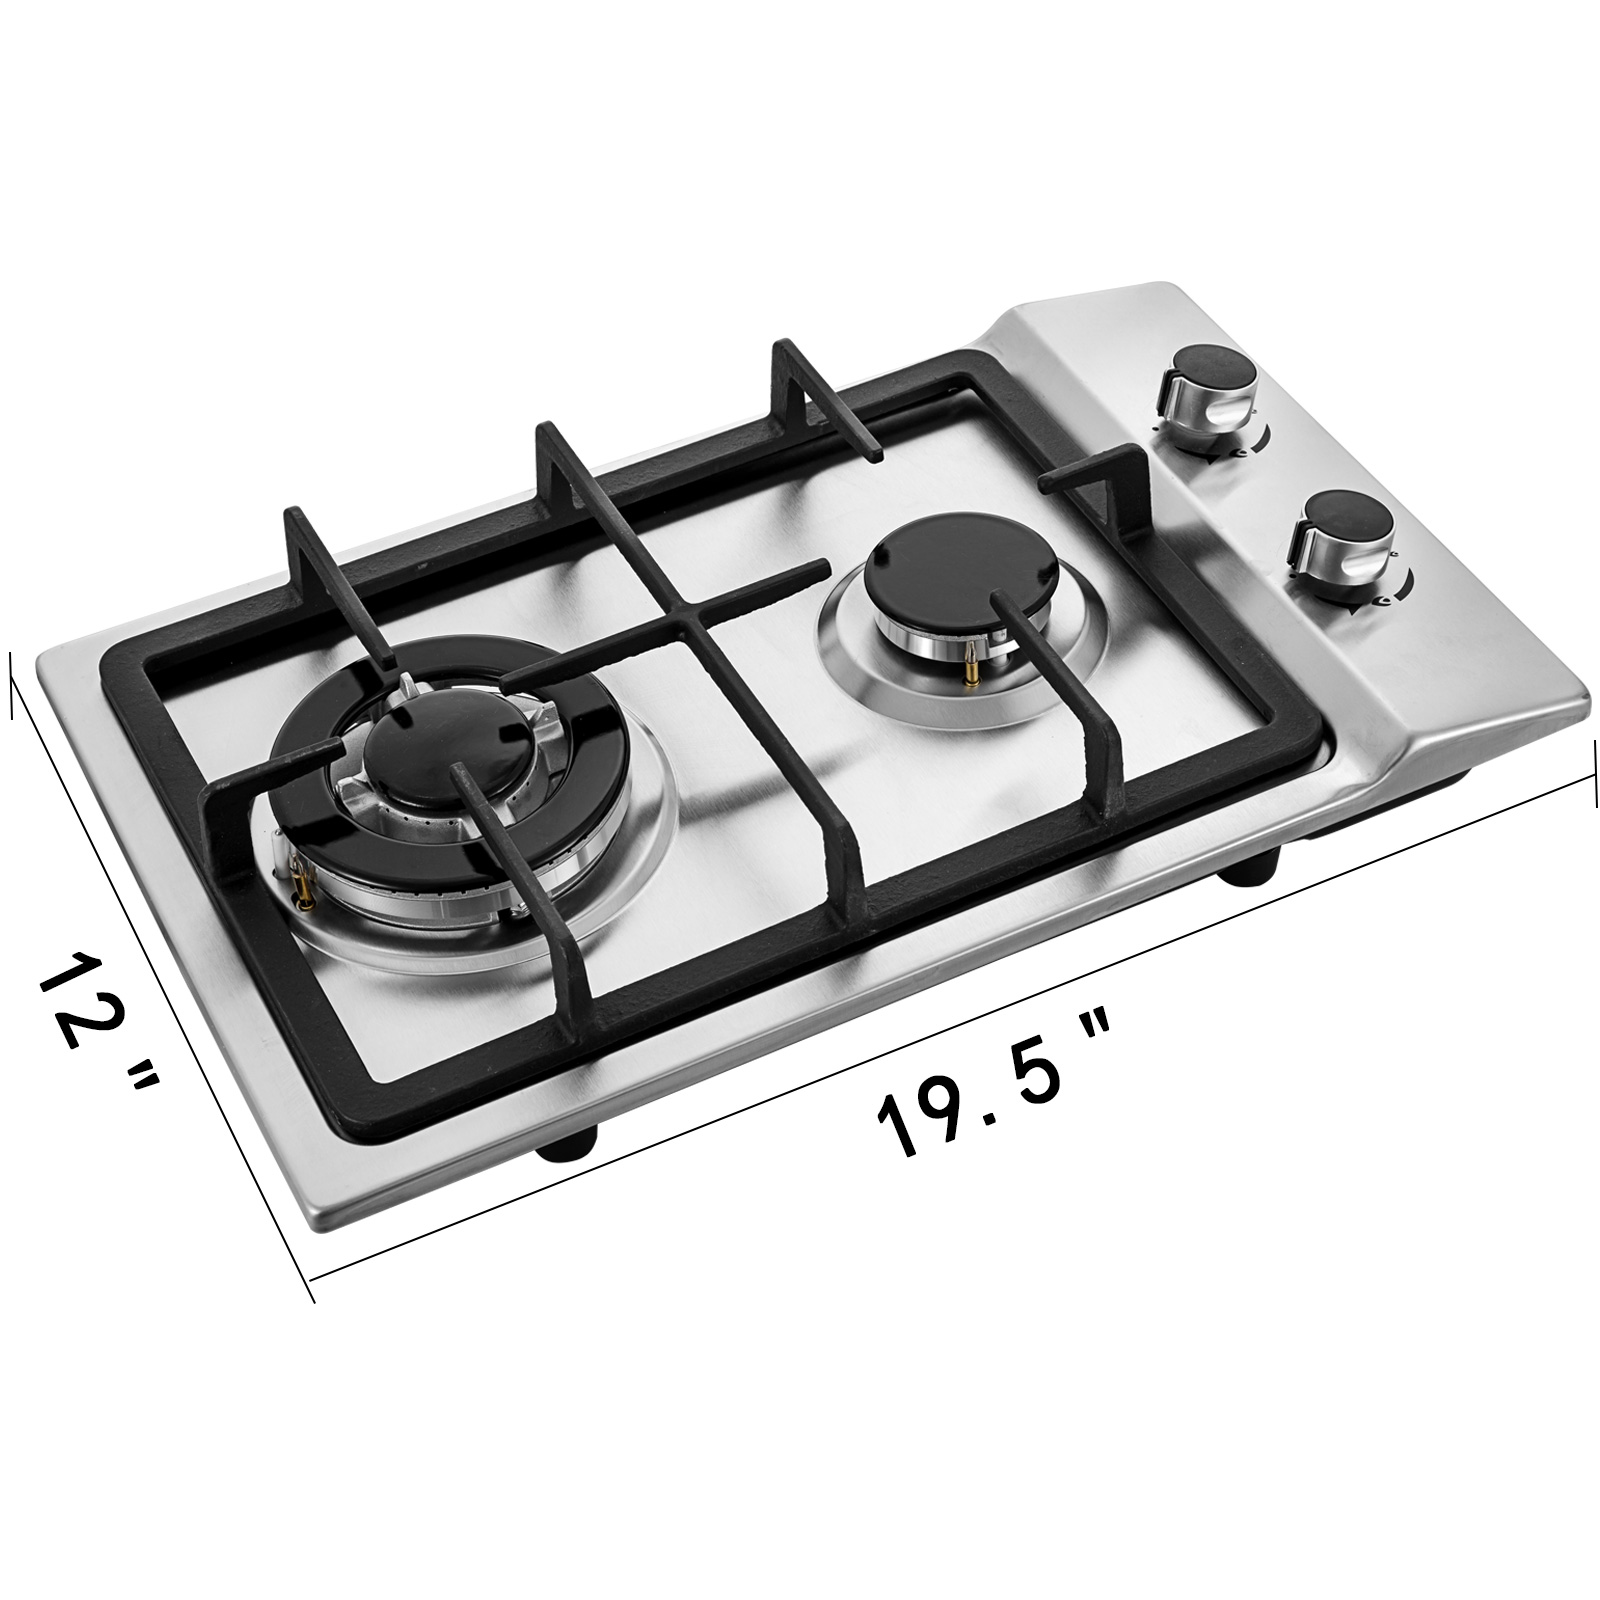 12" 2 Burners Gas Cooktop Stainless Steel Kitchen Sealed ...